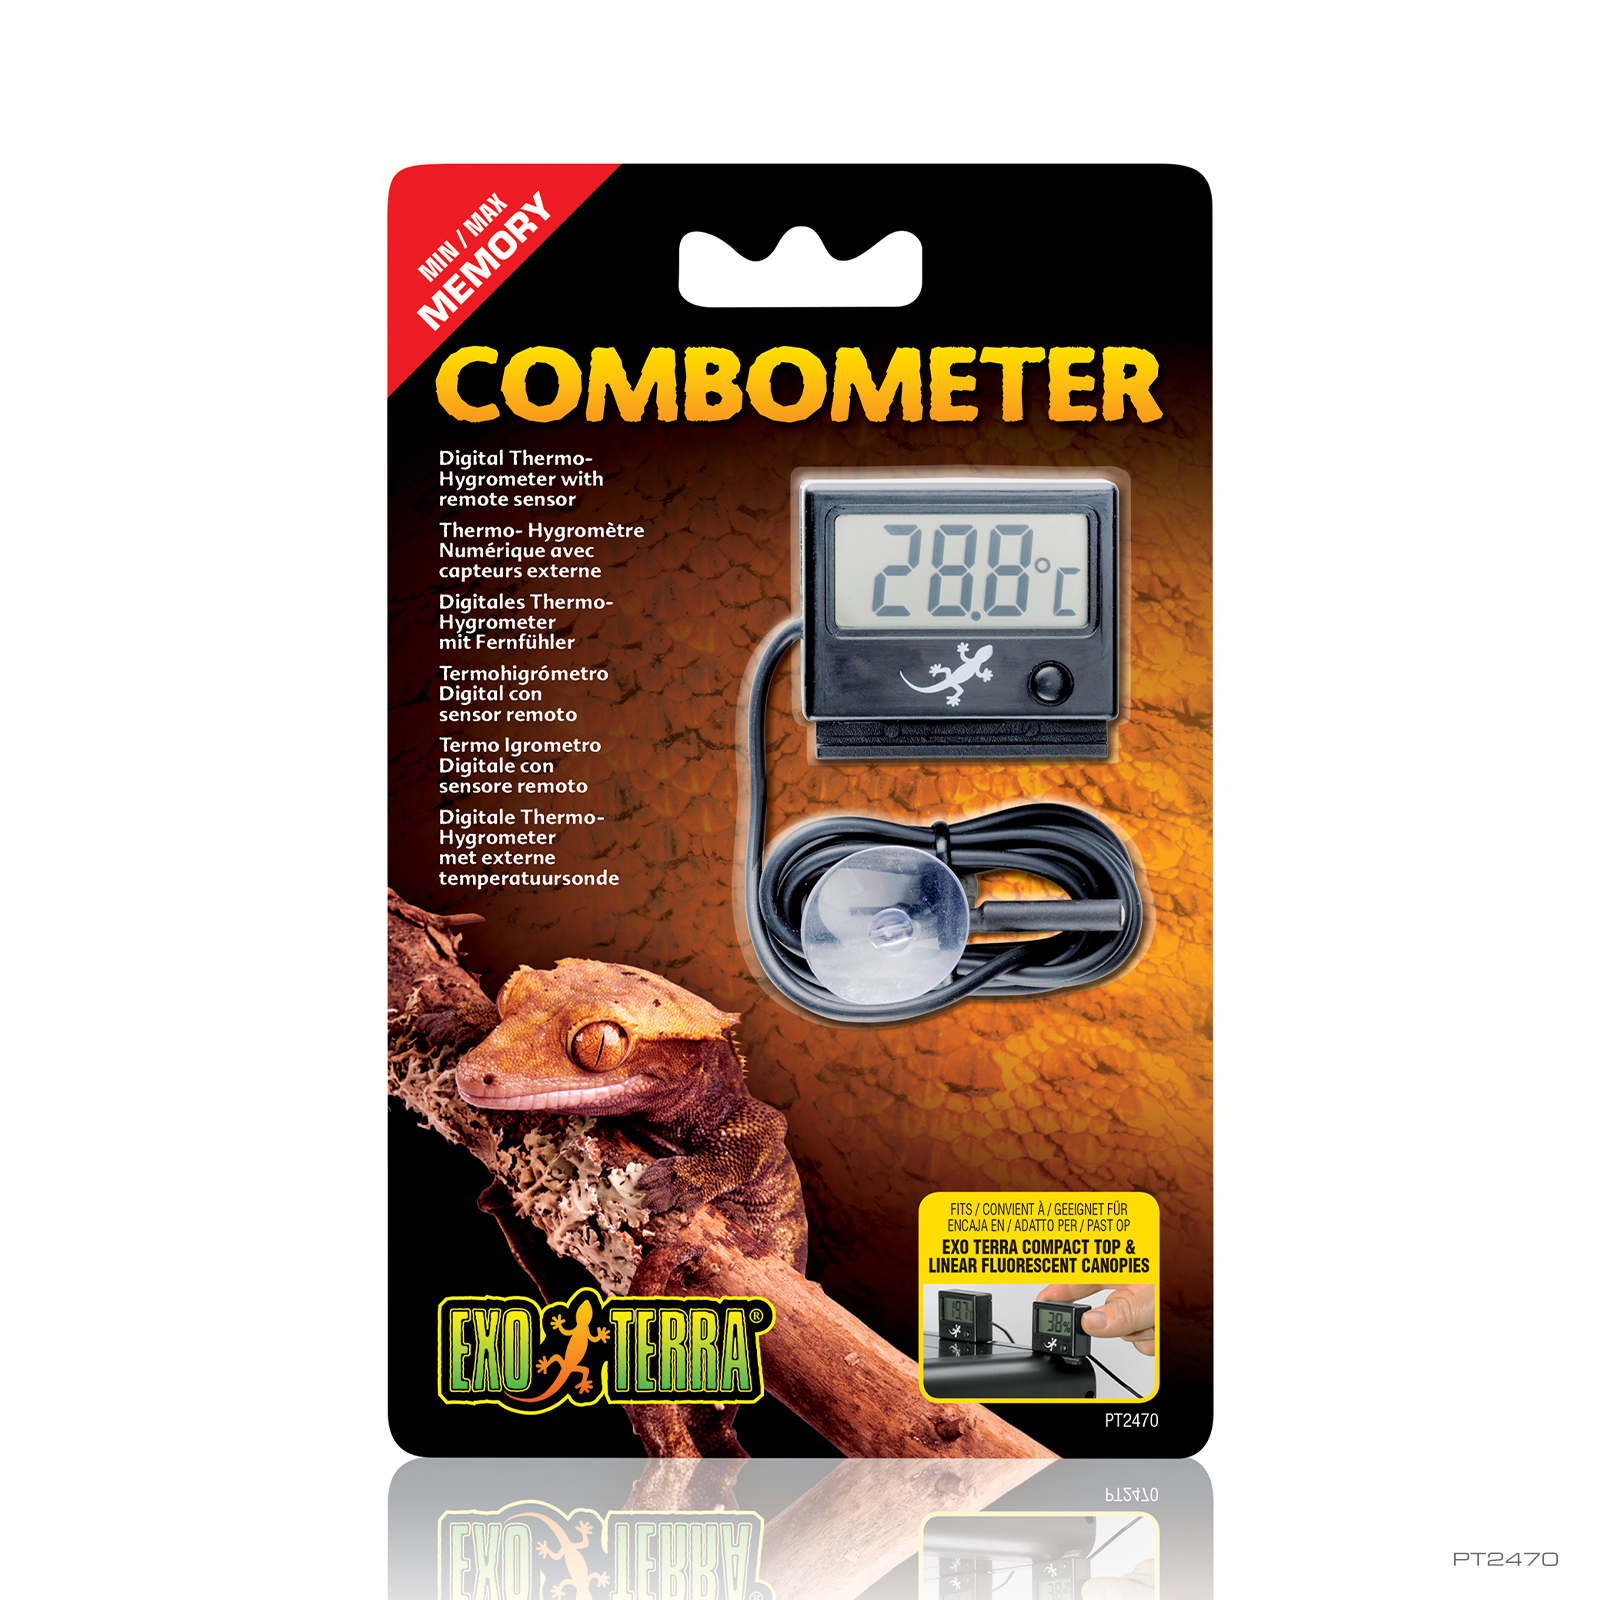 Inside/outside thermometer with min./max. function, Thermometers (inside- outside, minimum-maximum, radio-controlled), Temperature and monitoring, Measuring Instruments, Labware